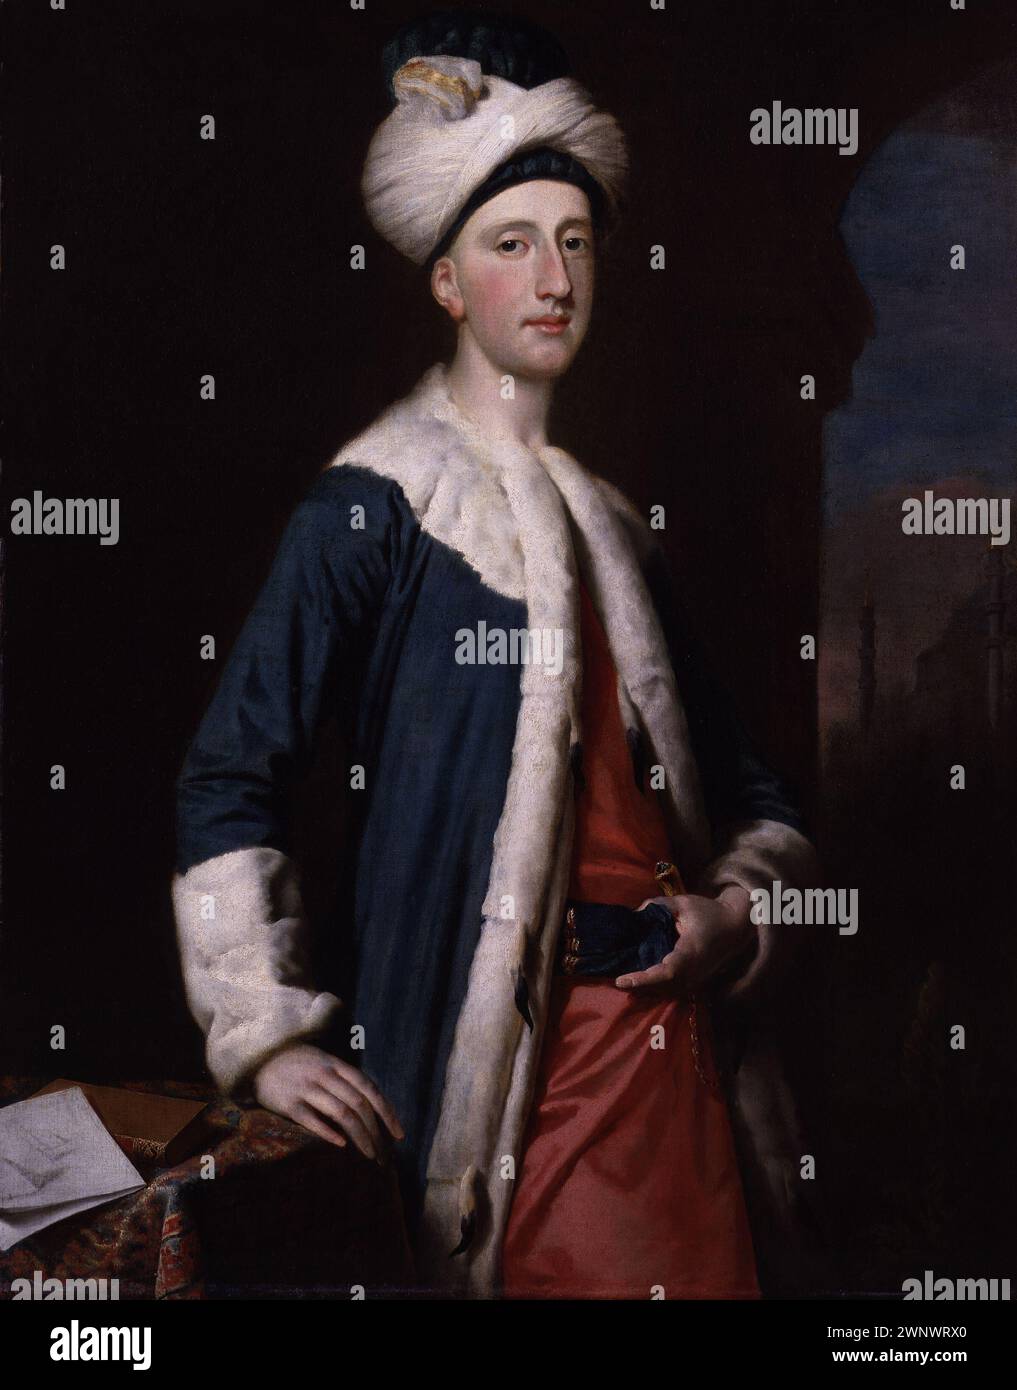 John Montagu (1718-1792), 4th Earl of Sandwich, Statesman, Politician, and inventor of the sandwich, portrait painting in oil on canvas by Joseph Highmore, 1740 Stock Photo